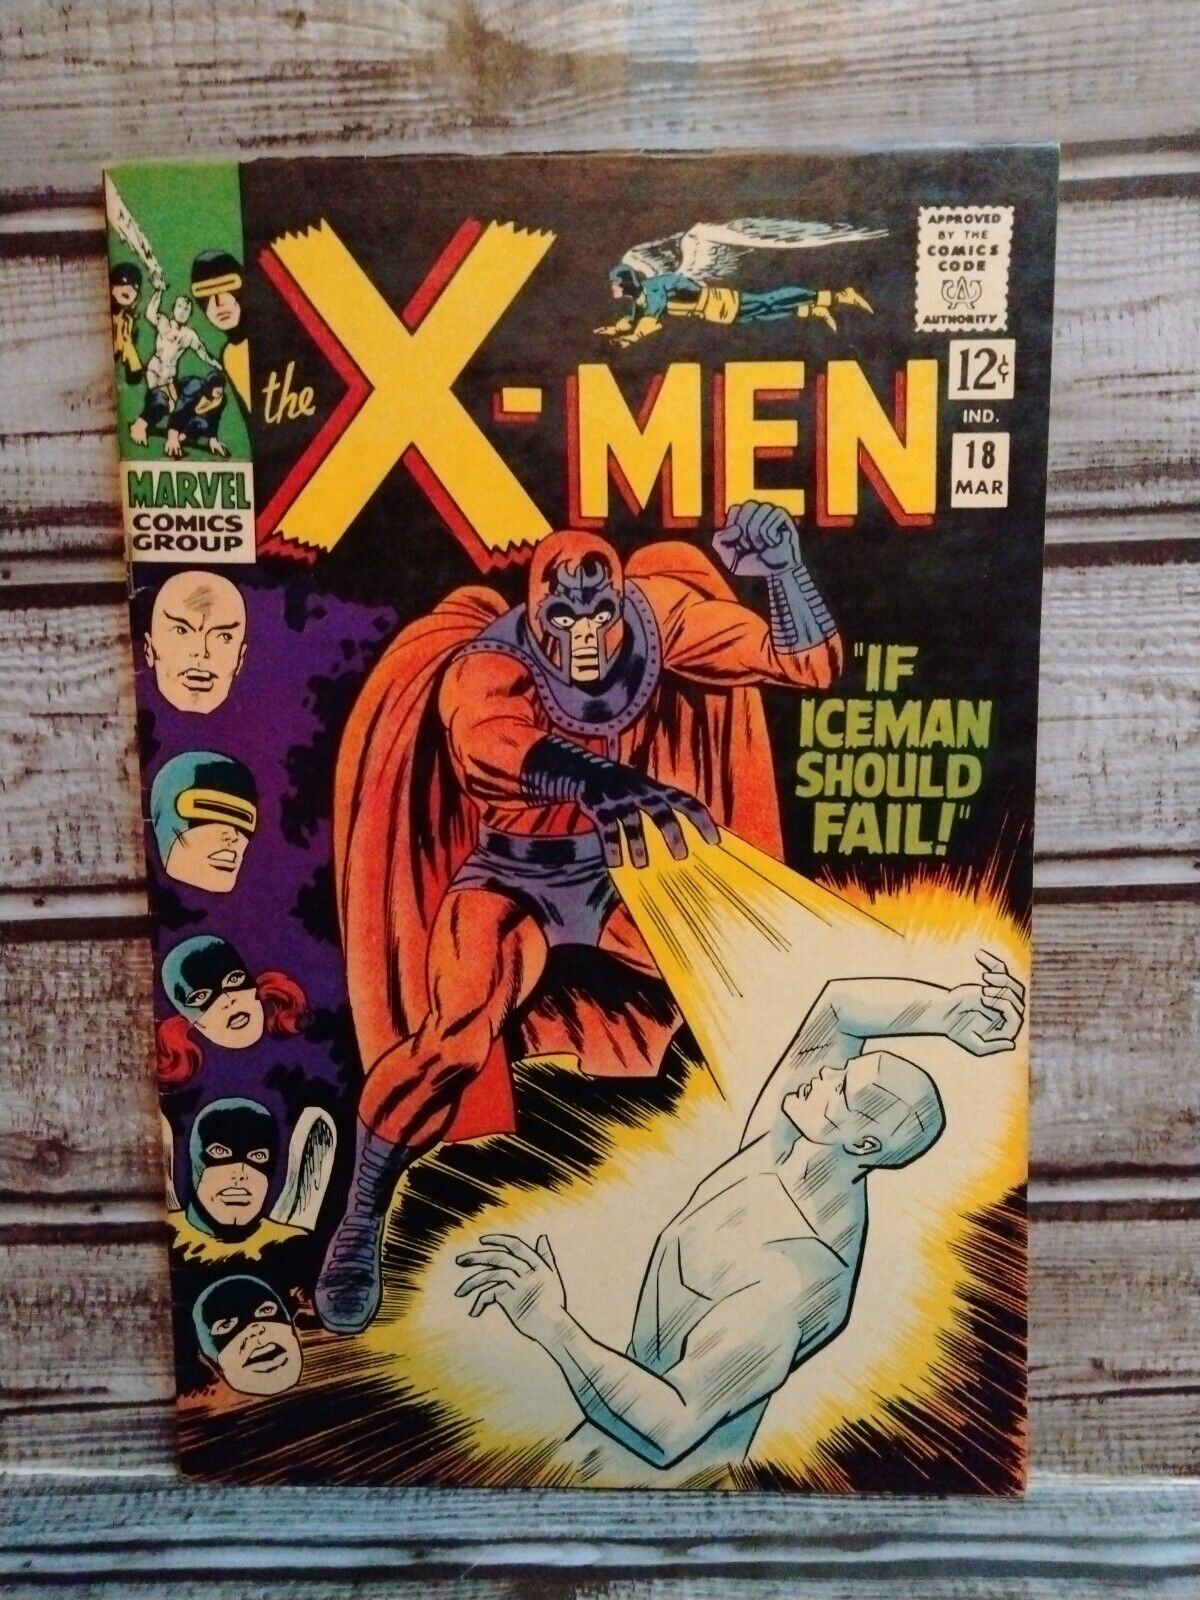 X-Men #18 If Iceman Should Fail Magneto Appearance Marvel Comics Silver Age 1966